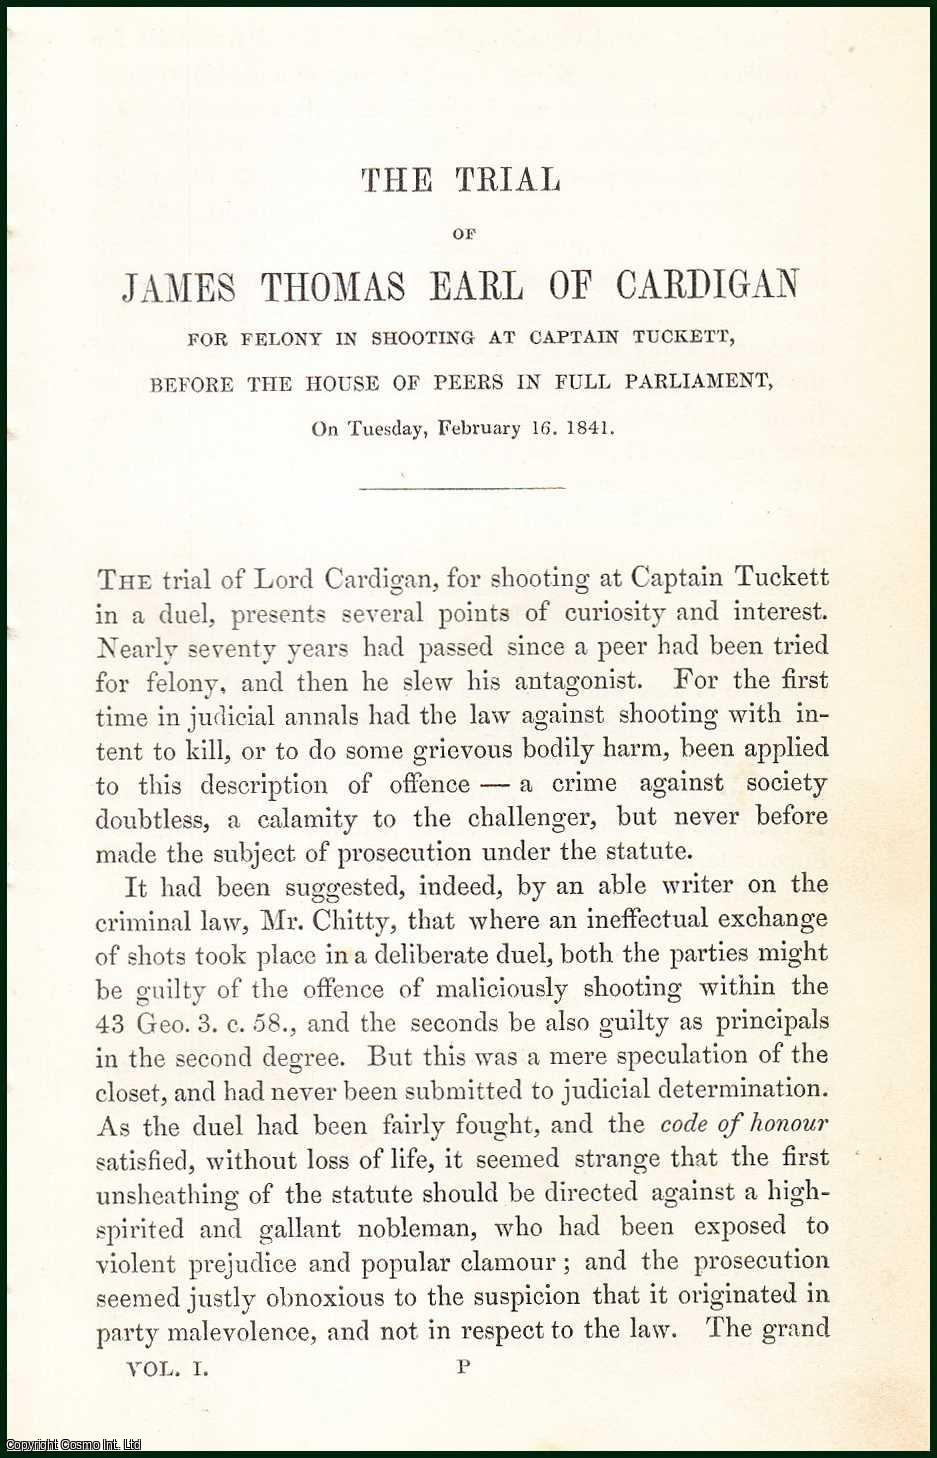 [Trial] - The Trial of James Thomas Earl of Cardigan for Felony in Shooting at Captain Tuckett, Before The House of Peers in Full Parliament, 1841. An uncommon original article from the Collected State Trials, 1850.